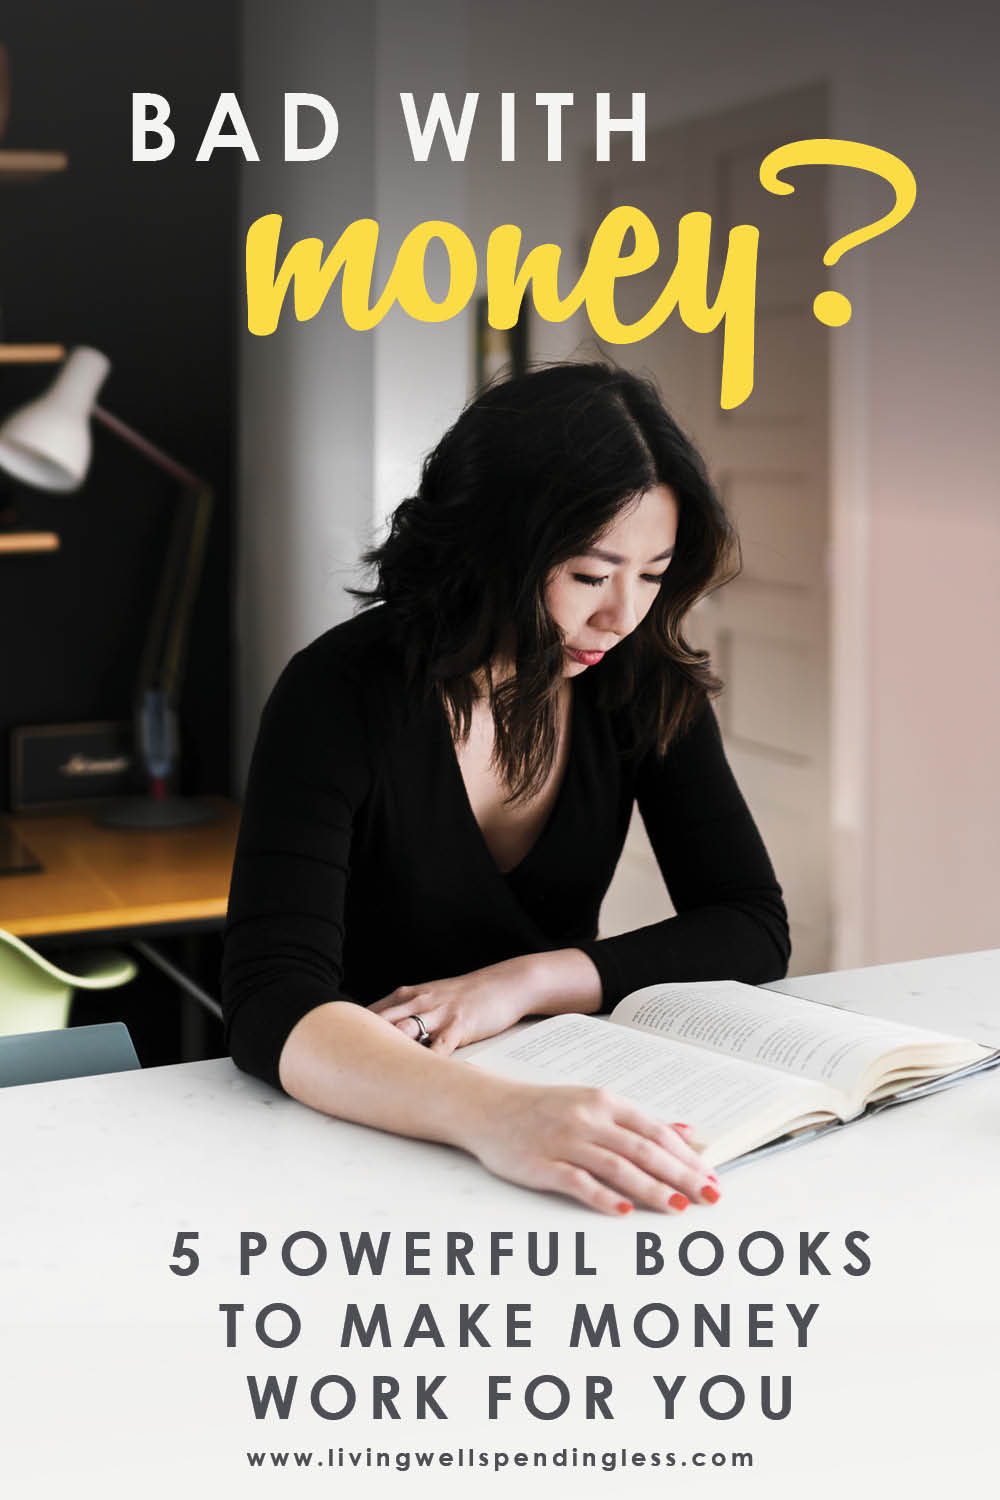 How to Make Your Money Work for You | Top 5 Books to Read Get the solutions and understanding you need to live a financially abundant life! These are the top 5 books to read when it comes to understanding how to make your money work for you. With the right tools and resources, having financial security is possible, so don't miss it! #financialpeace #budgeting #bestbooksonmoney #moneybooks #finances #smartmoney